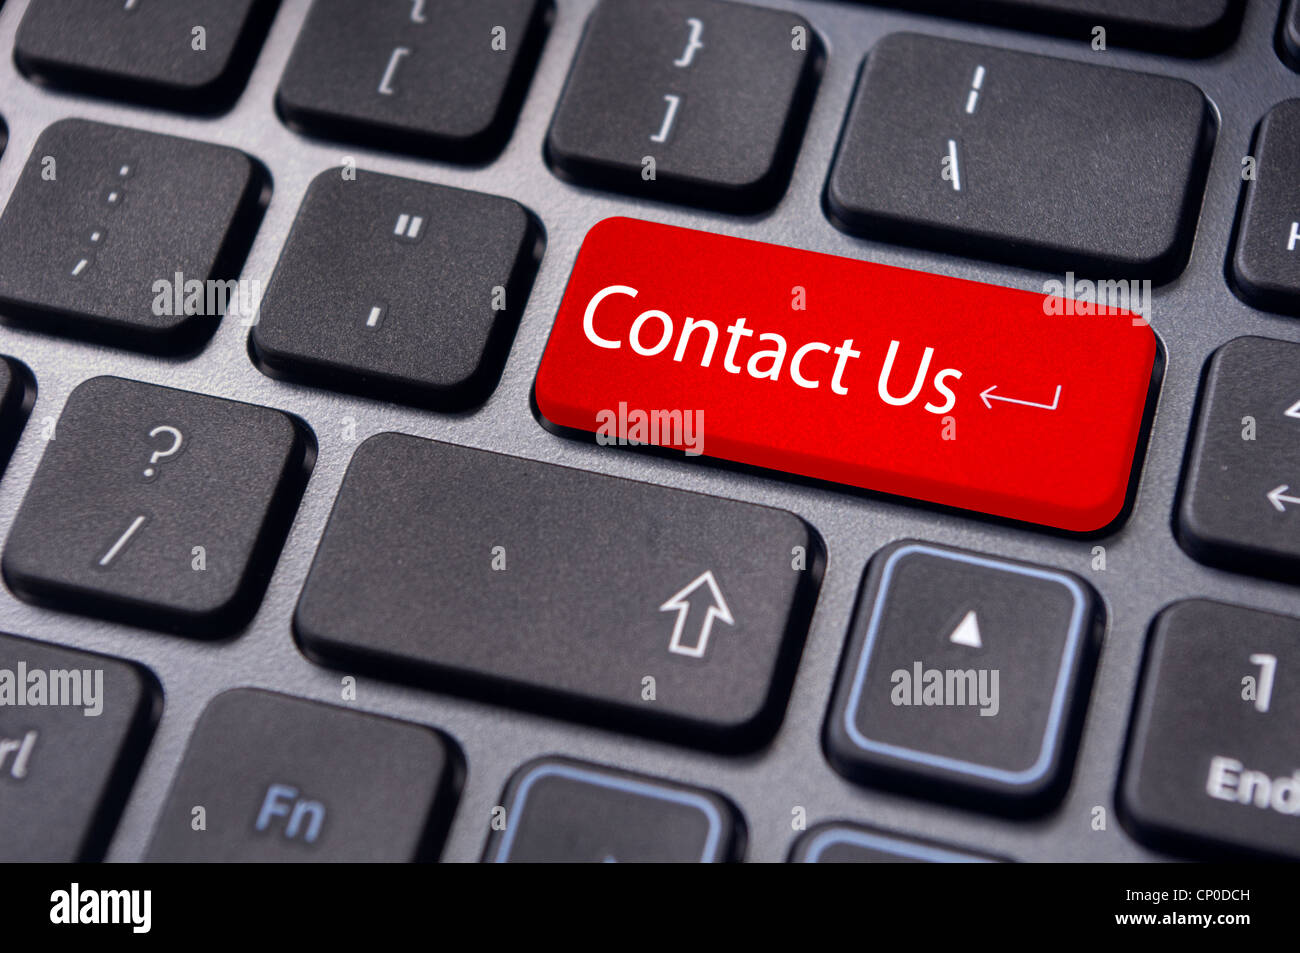 A 'contact us' message on enter key of keyboard, for online communications. Stock Photo